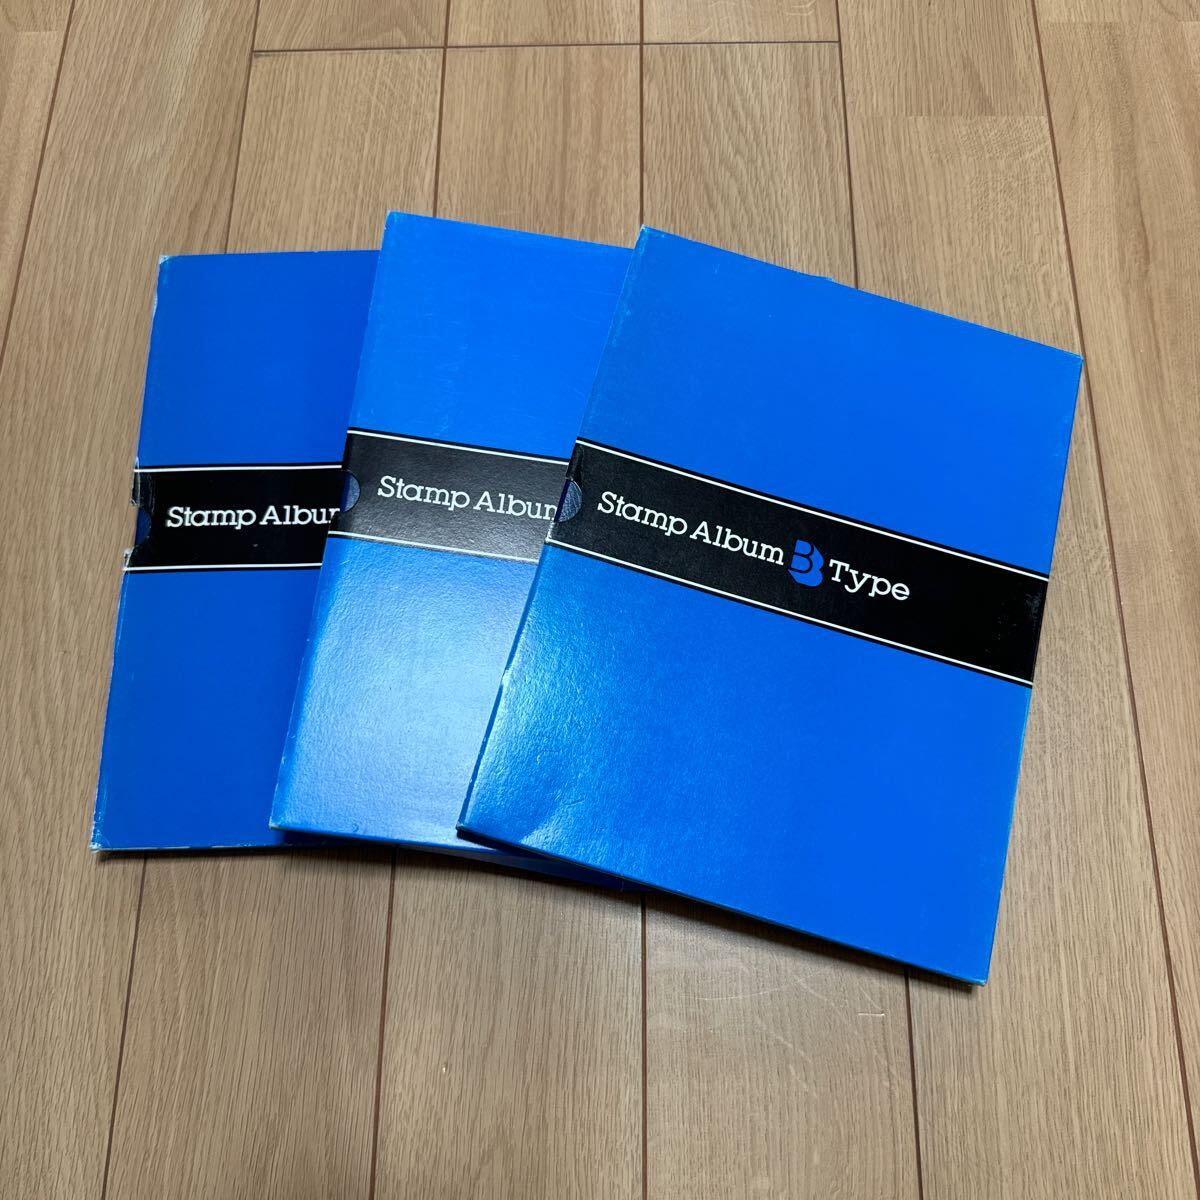  stock book Stamp Album BTypete-ji-SB-30 stamp album blue 3 pcs. summarize case attaching length some 26.8cm width some 20cm cardboard 8 sheets 16 page 6 step 